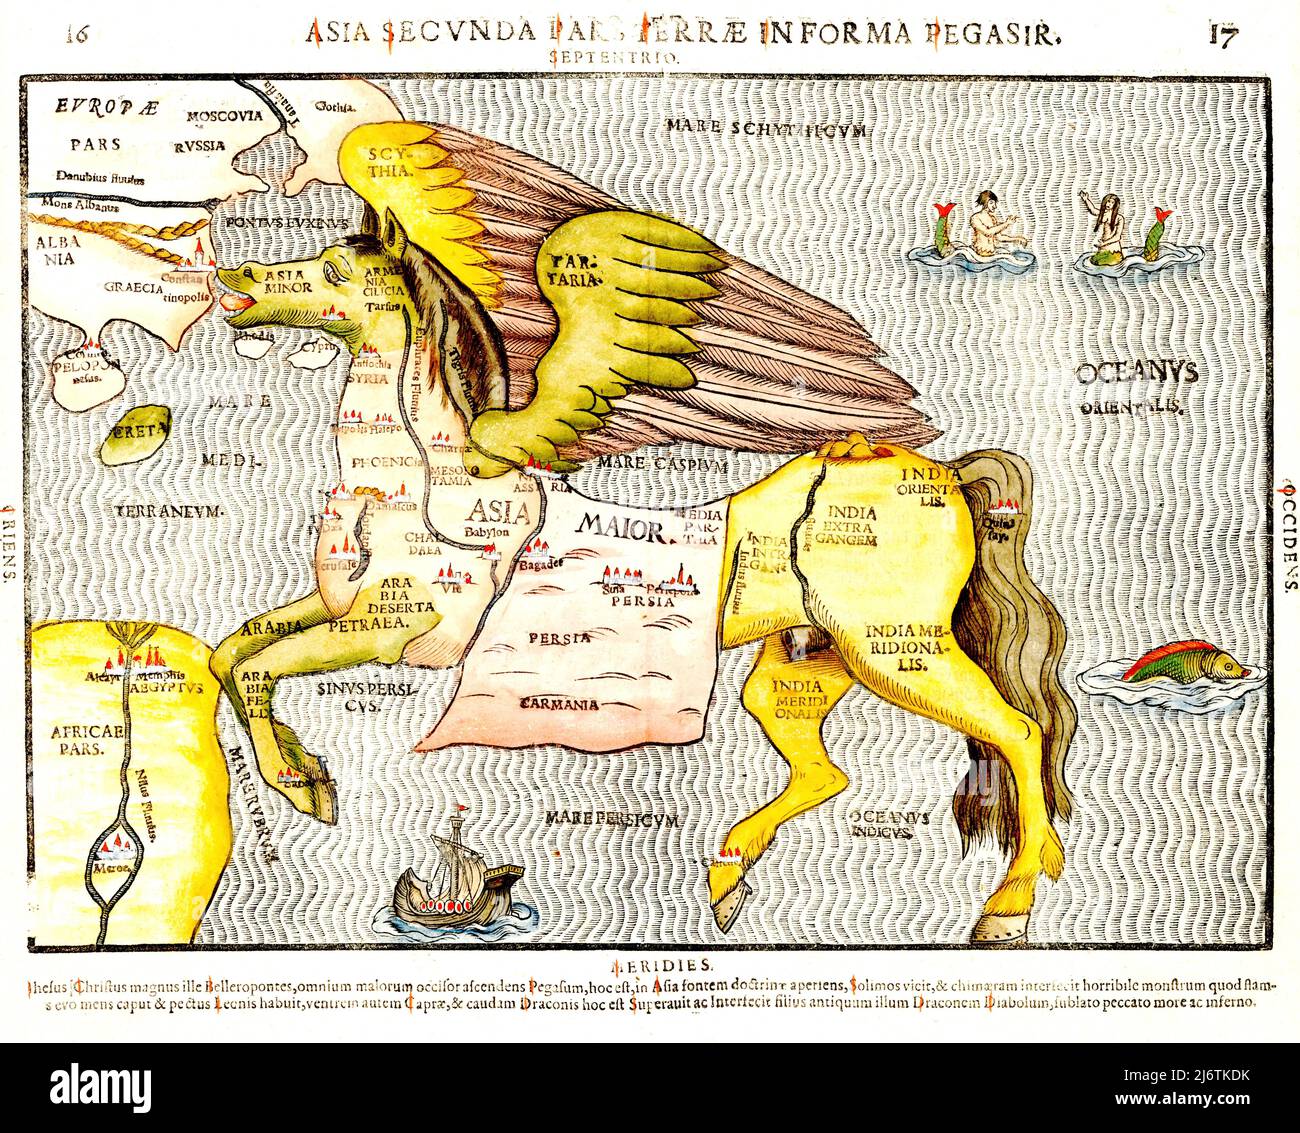 Pictorial Map by Heinrich Bünting, depicting Asia as Pegasus - c1581 Stock Photo